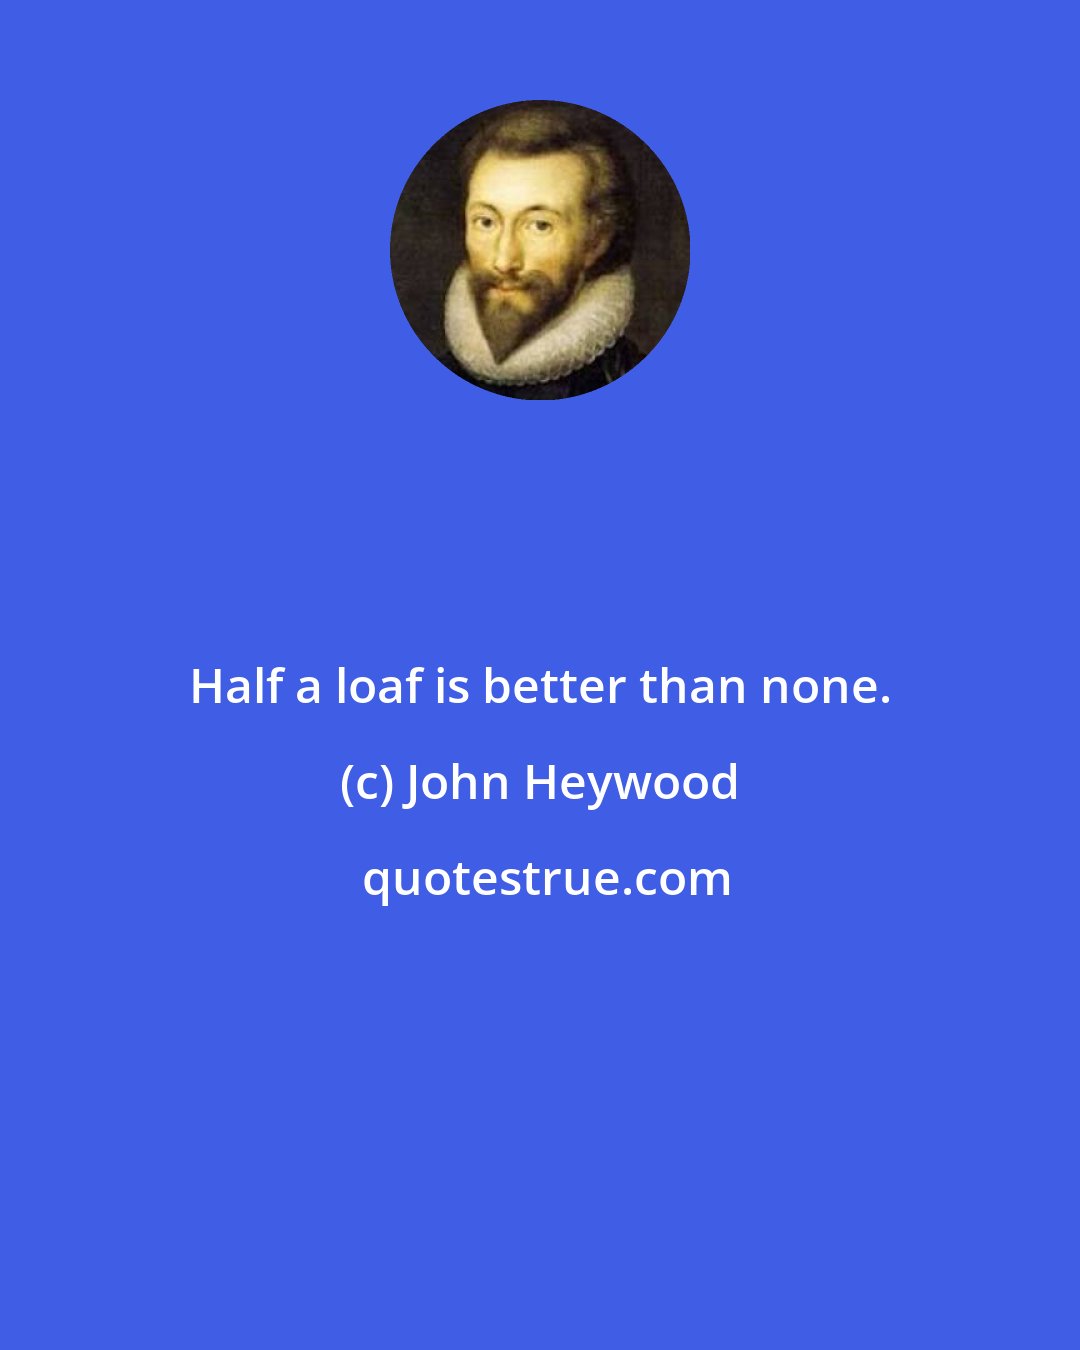 John Heywood: Half a loaf is better than none.